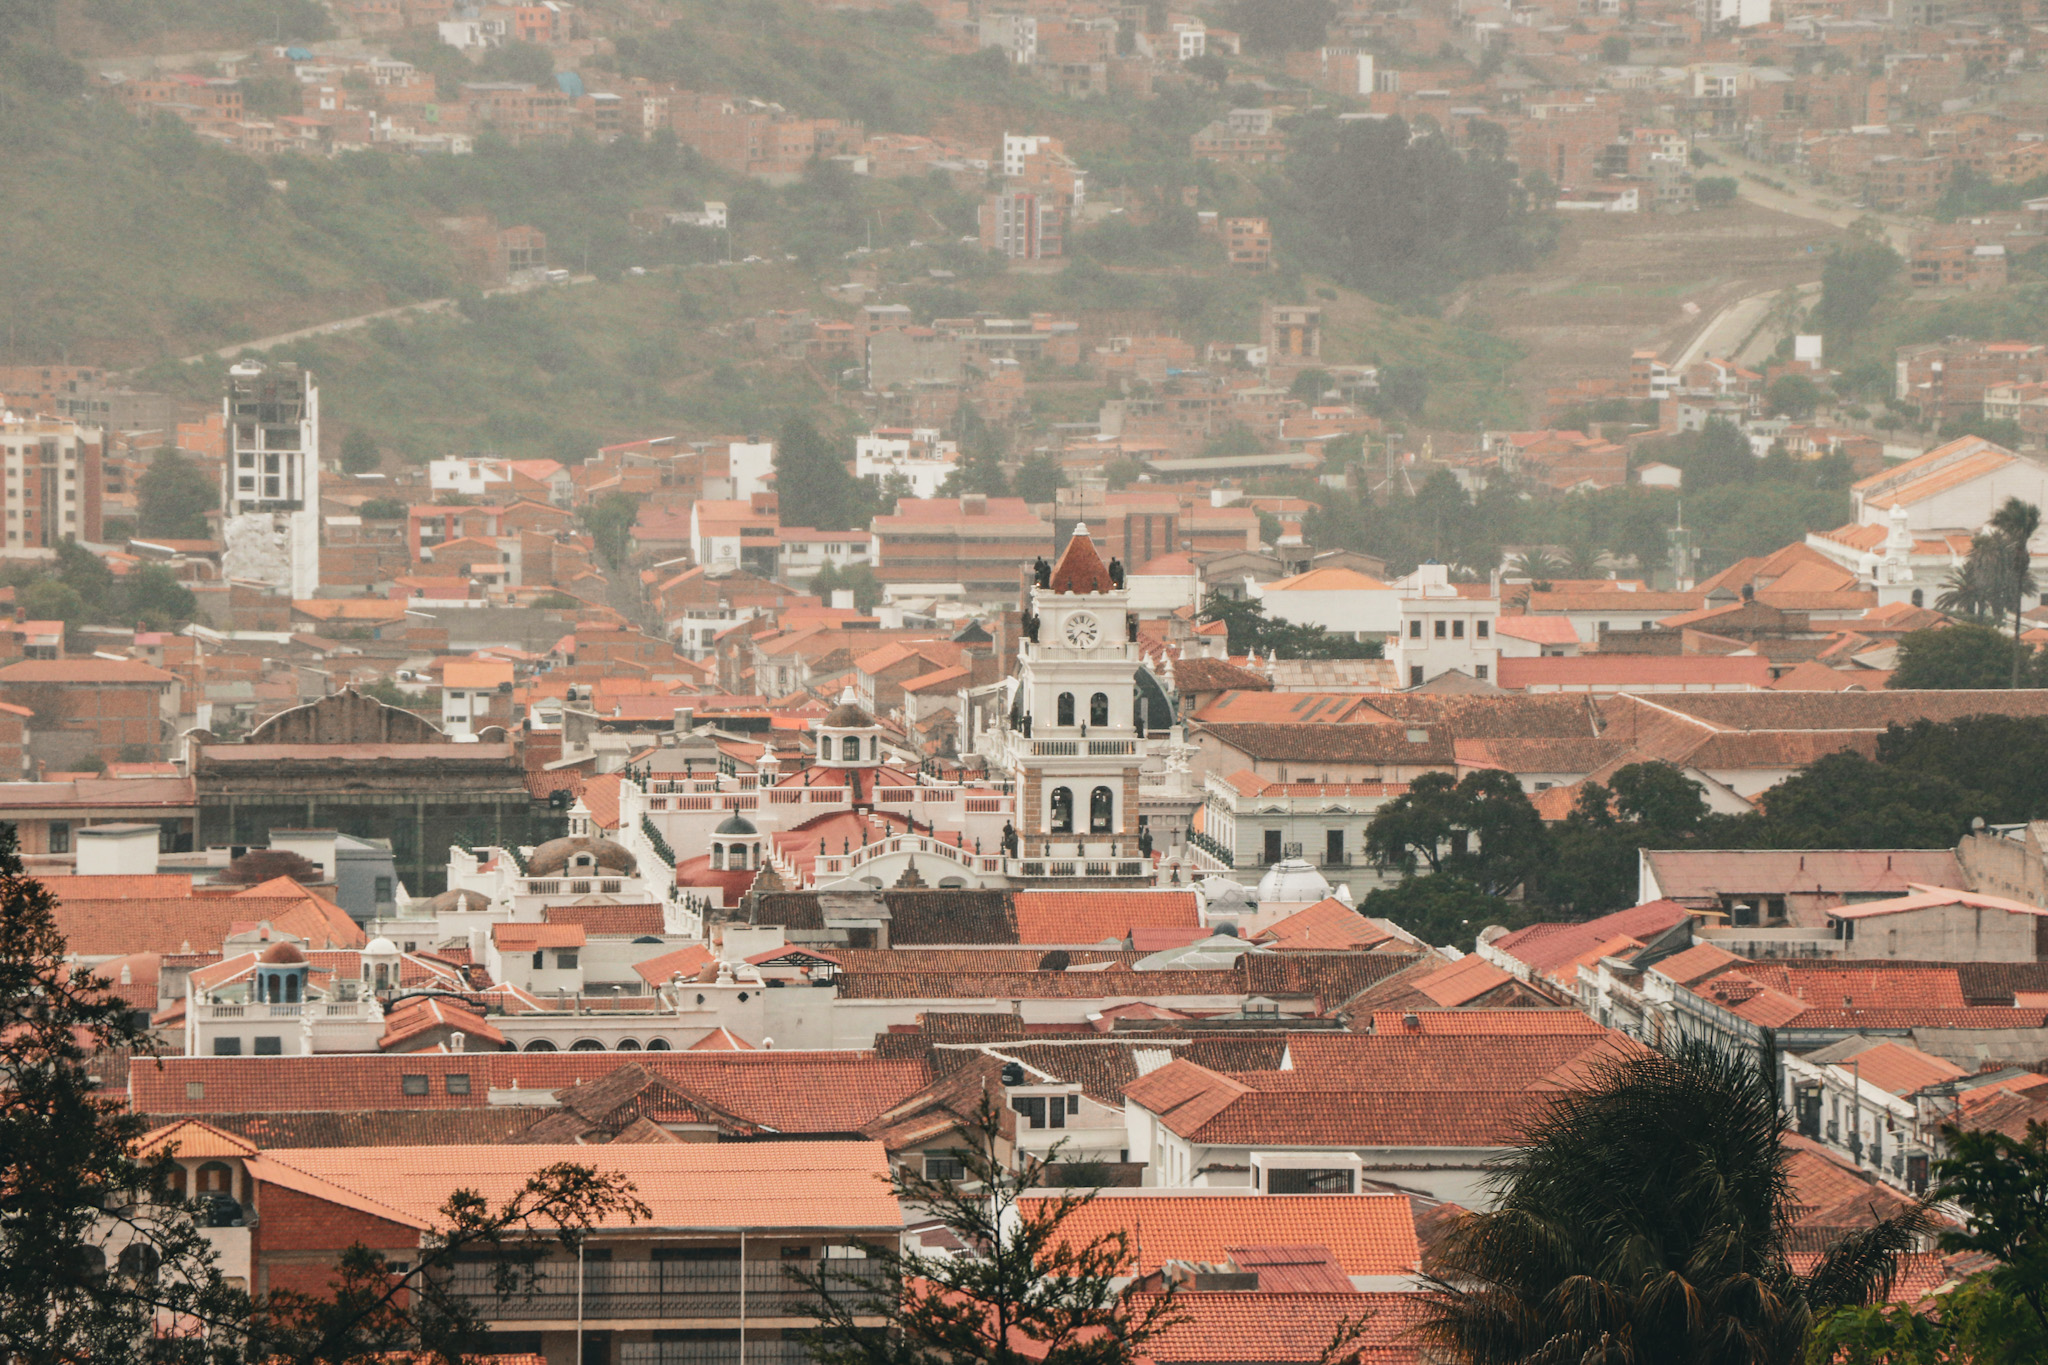 Best Things to Do in Sucre, Bolivia: Enjoy the view over Sucre from Recoleta viewpoint